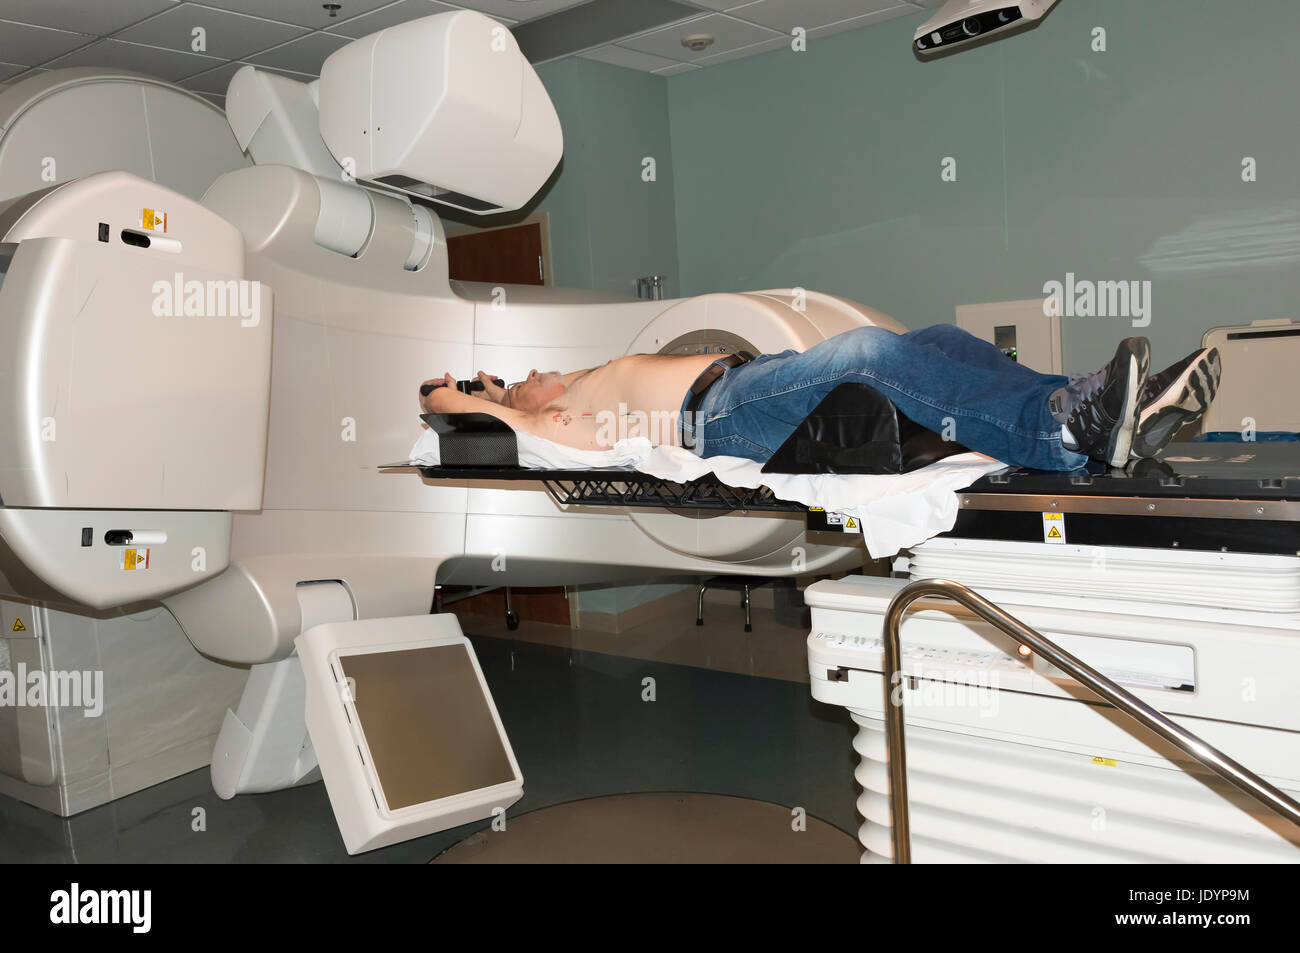 Patient Radiation therapy laser markings lines for targeting cancer cells in the Chest Stock Photo